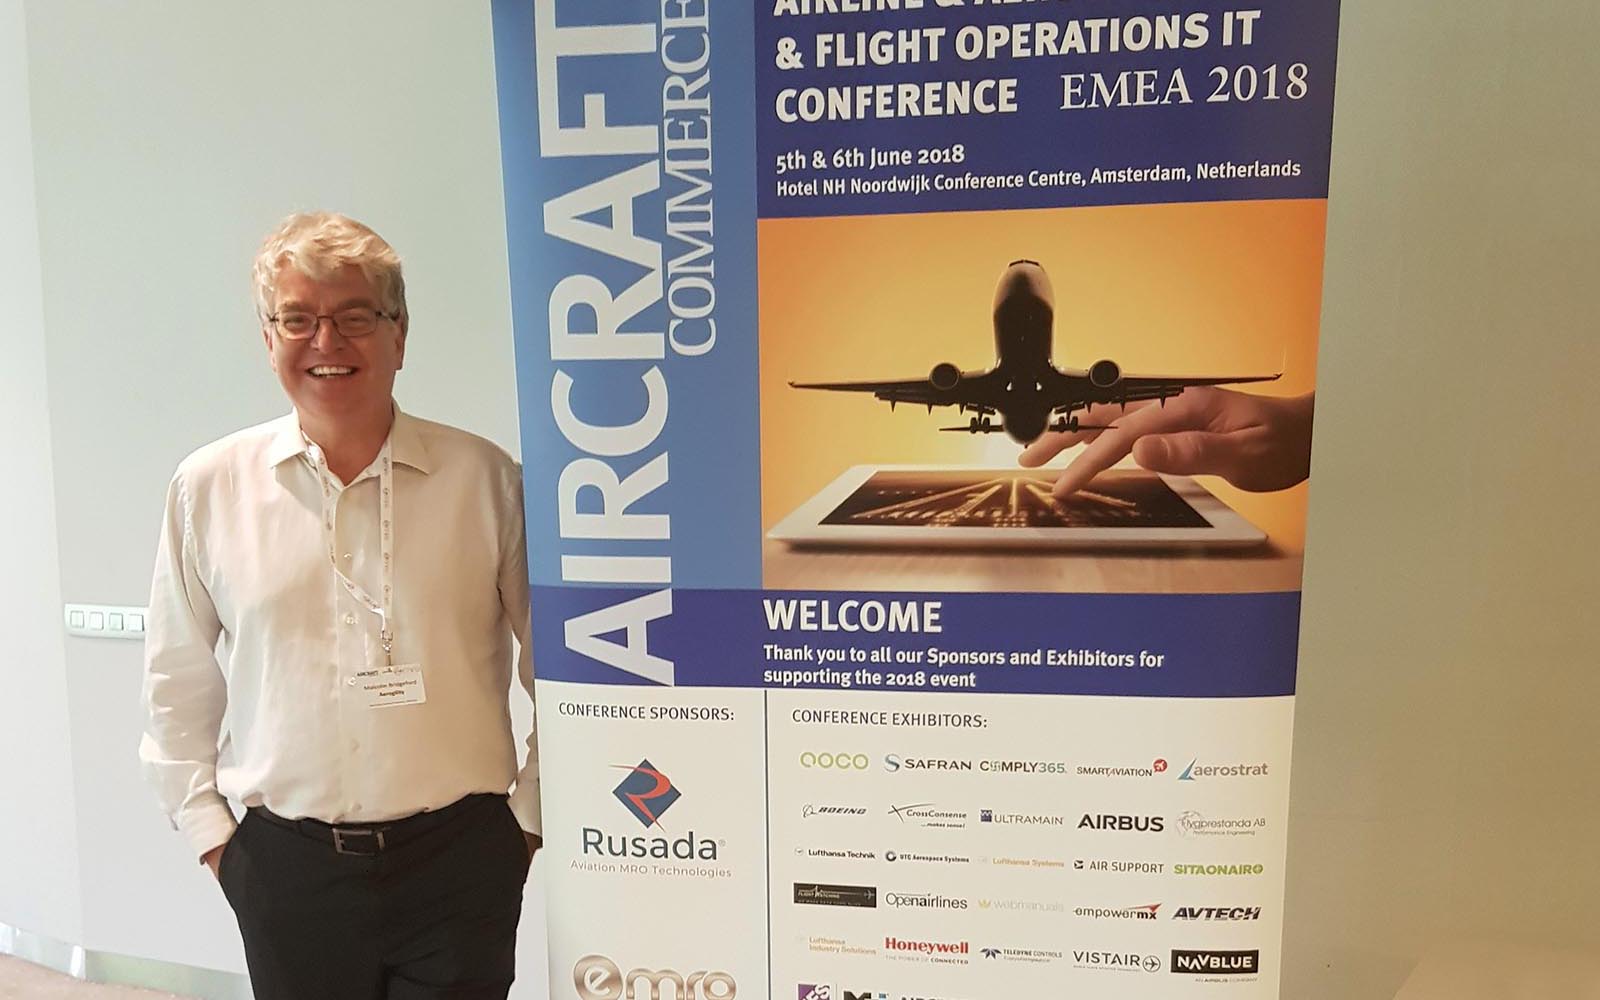 Aerogility attends Airline & Aerospace MRO & Flight Operations IT Conference 2018